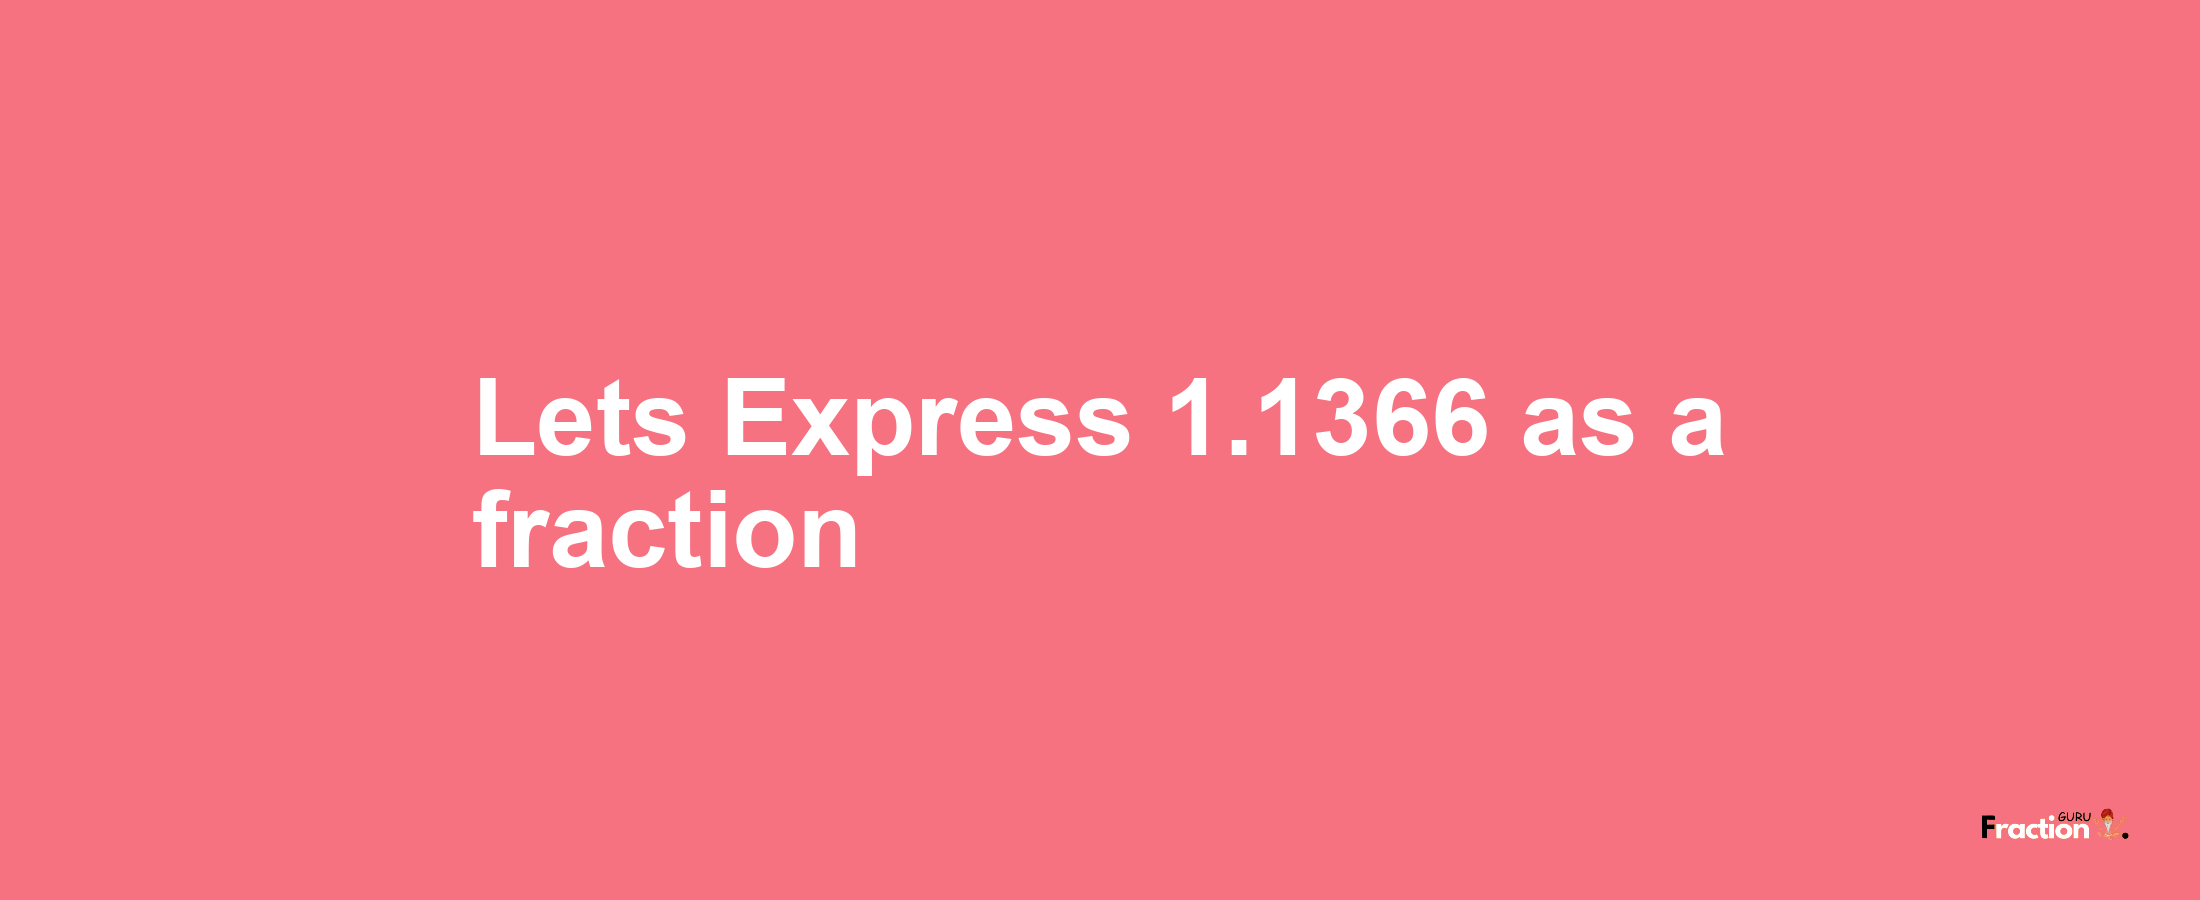 Lets Express 1.1366 as afraction